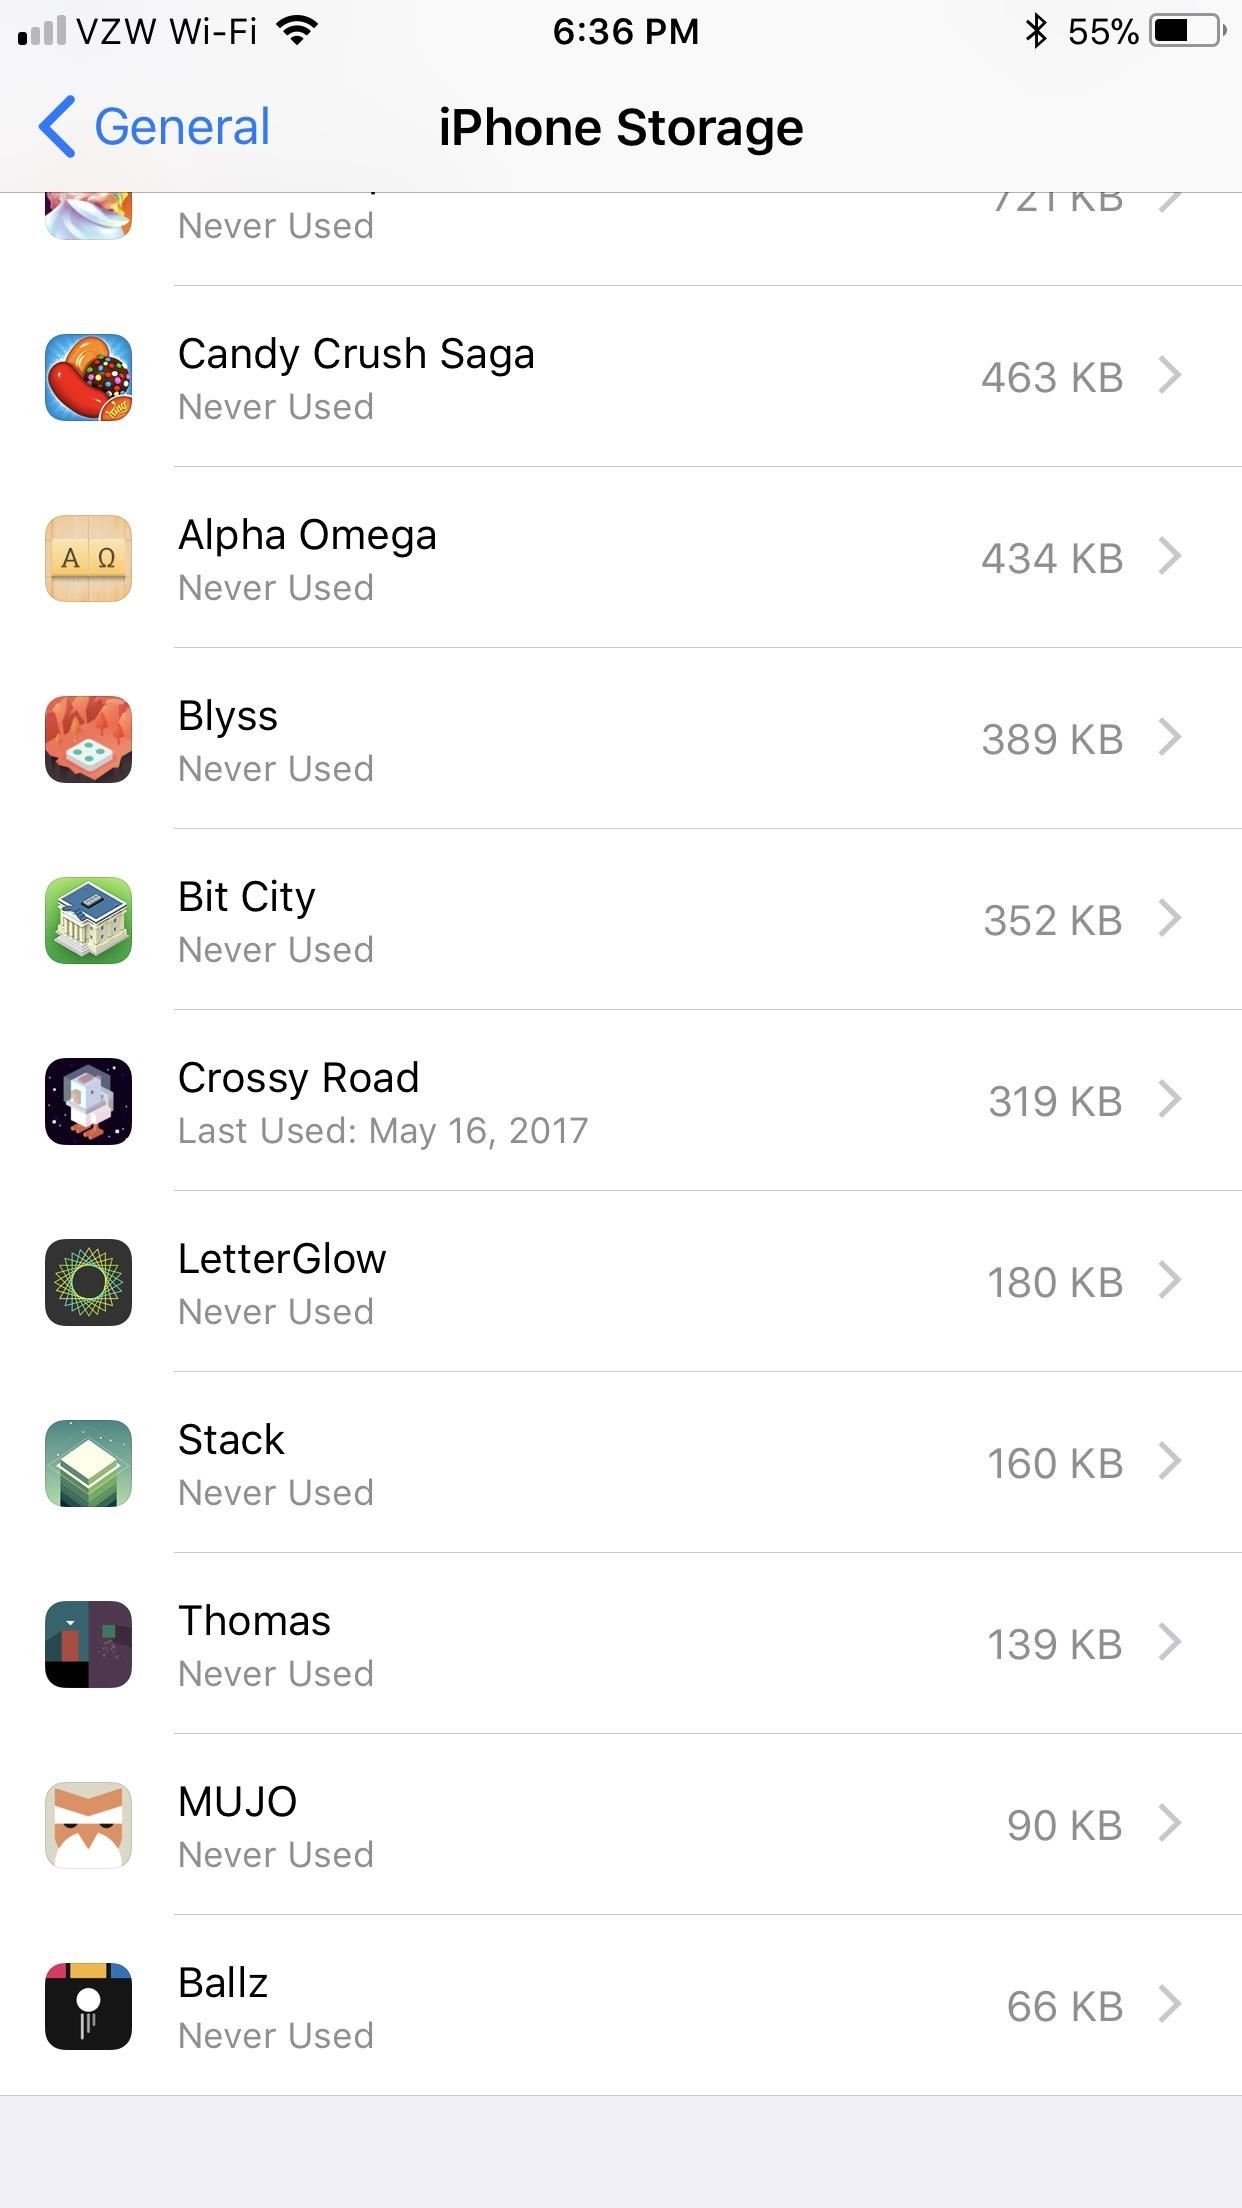 How to Offload Unused Apps to Free Up Storage Space on Your iPhone